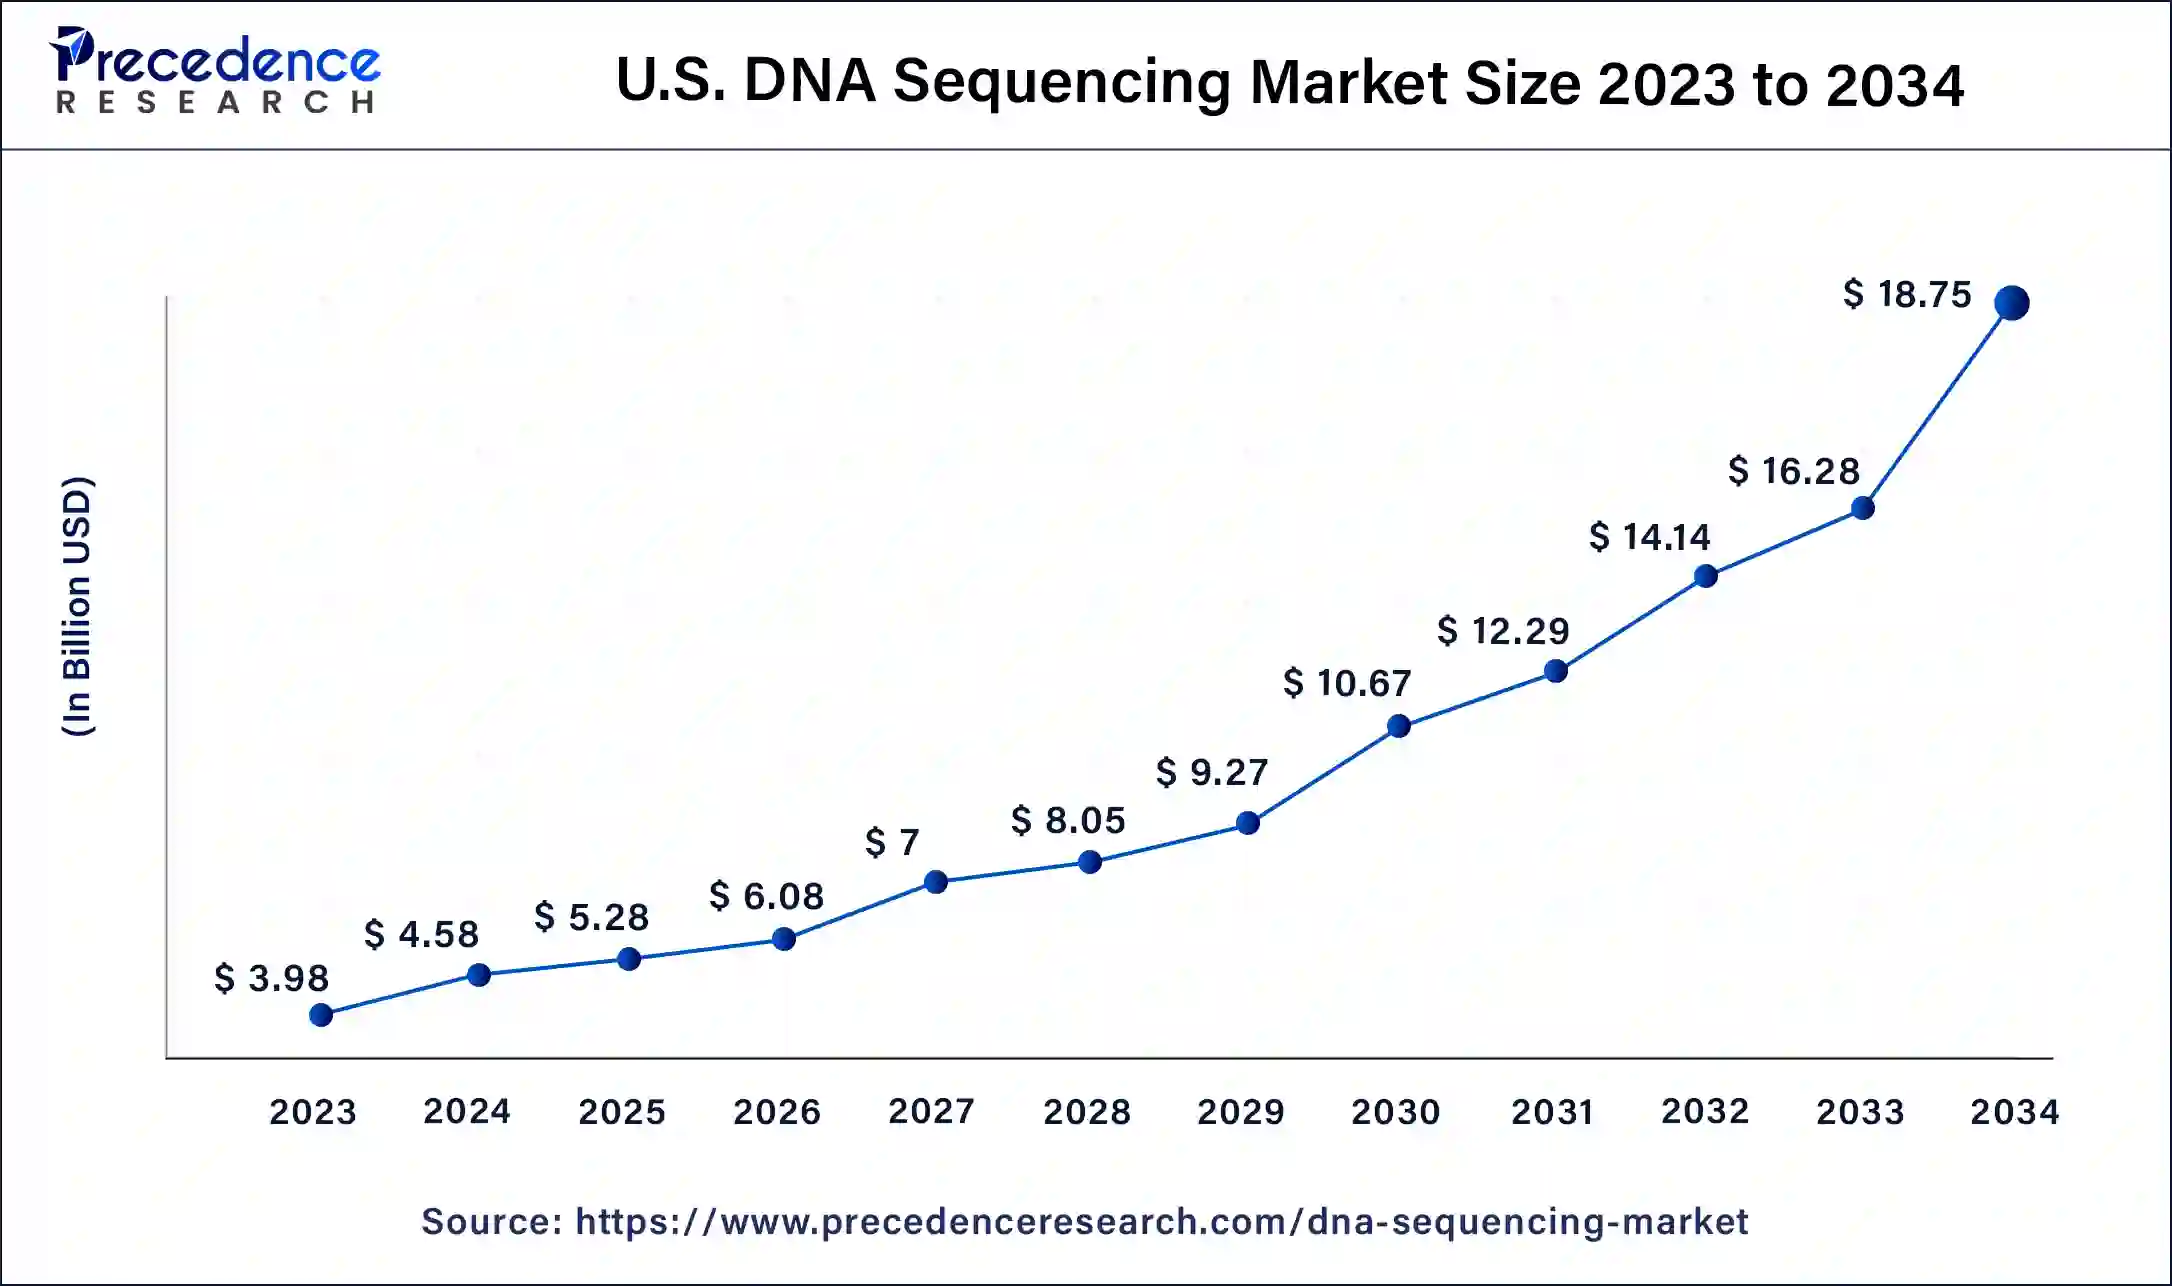 U.S. DNA Sequencing Market Size 2024 to 2034